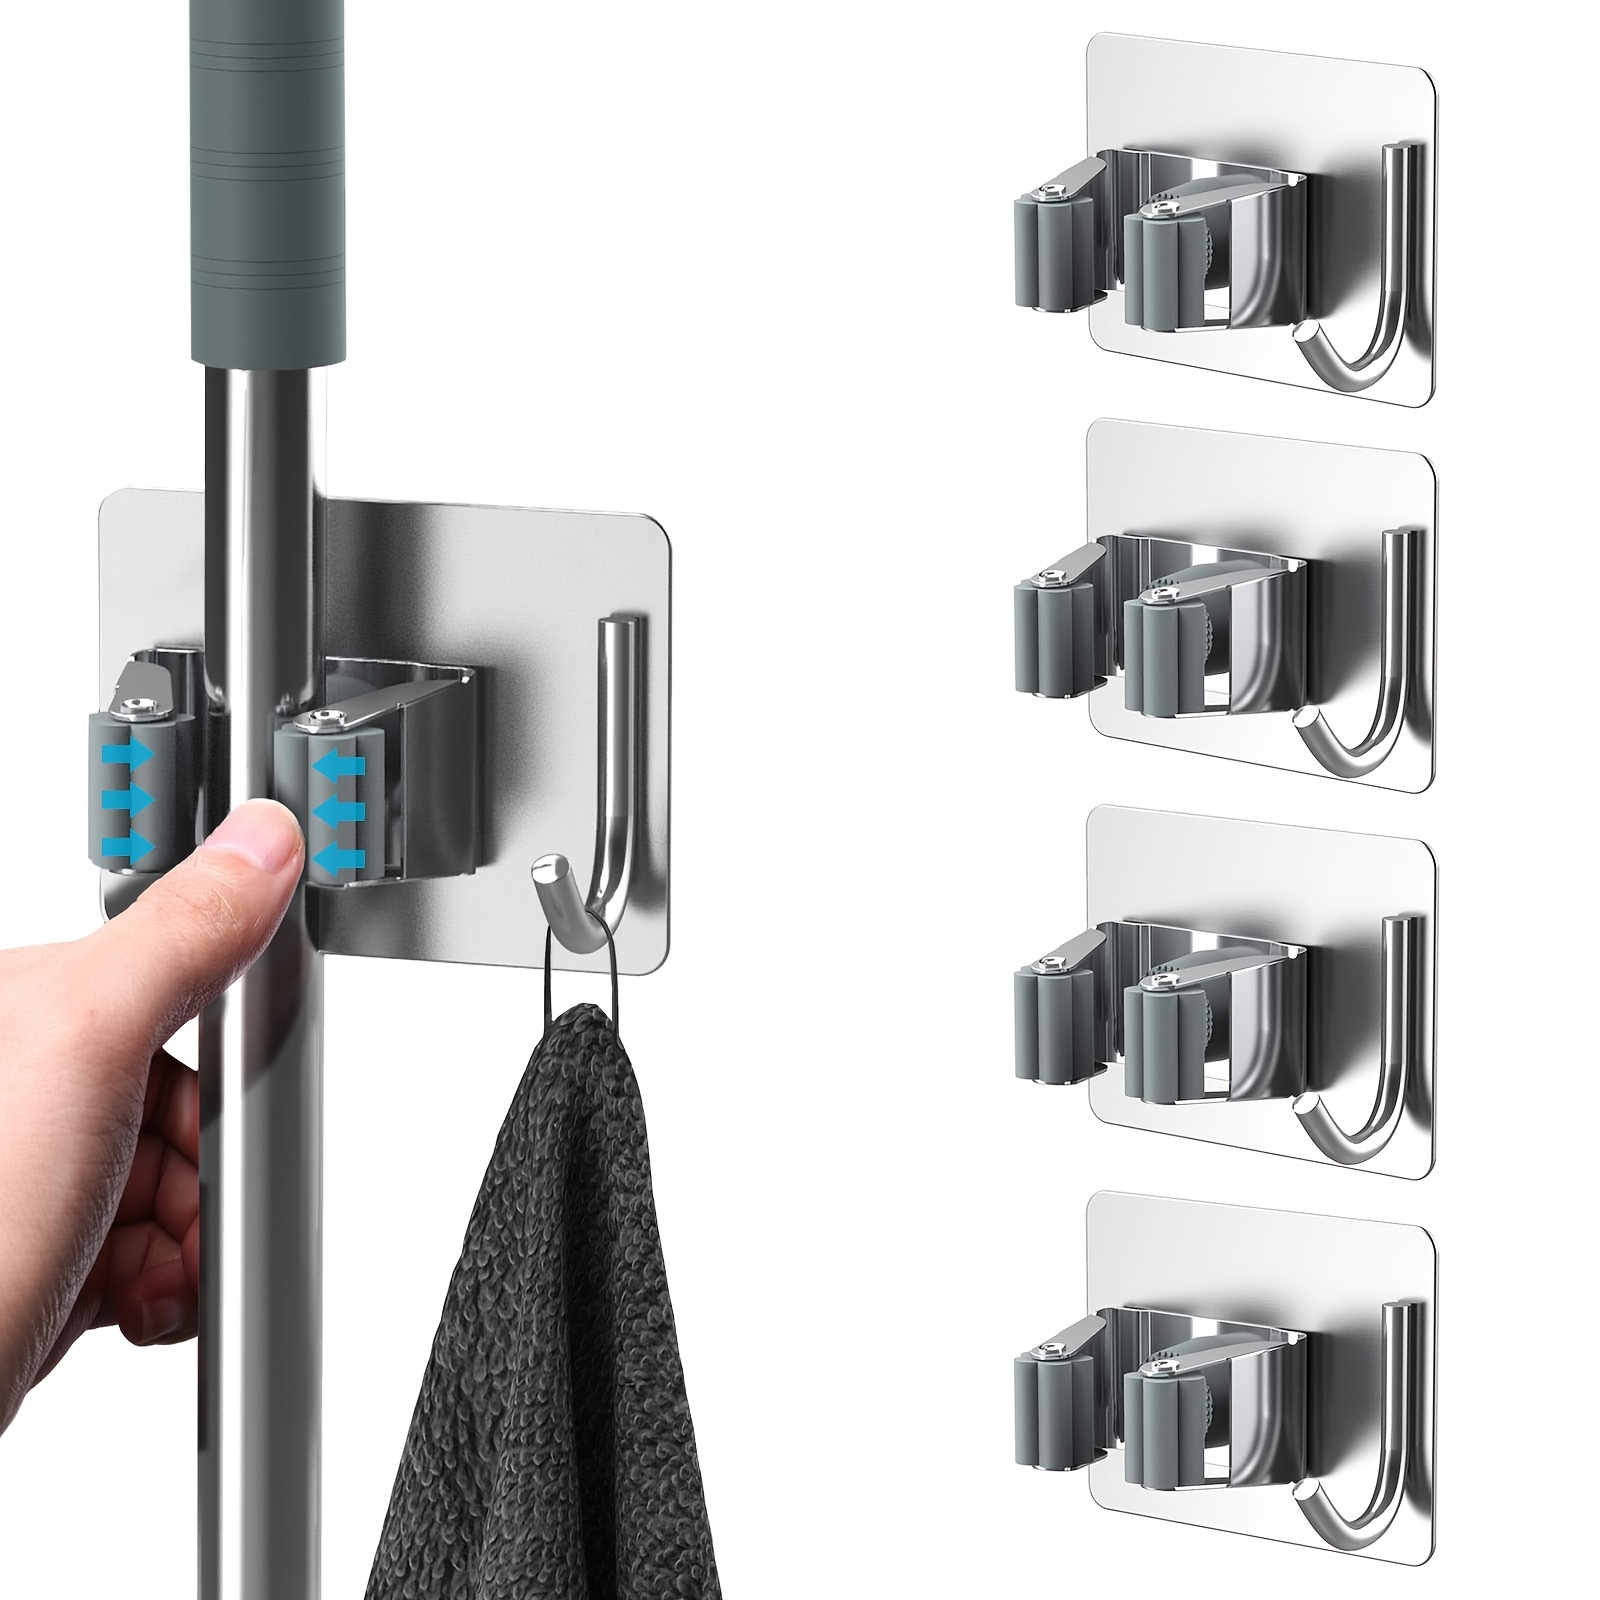 

1pc Mop Broom Holder No Drill Sus304 Stainless Steel Mop Broom Wall Hanging Heavy Hook Hanger Self Adhesive For Bathroom Kitchen Office Rv Kitchen